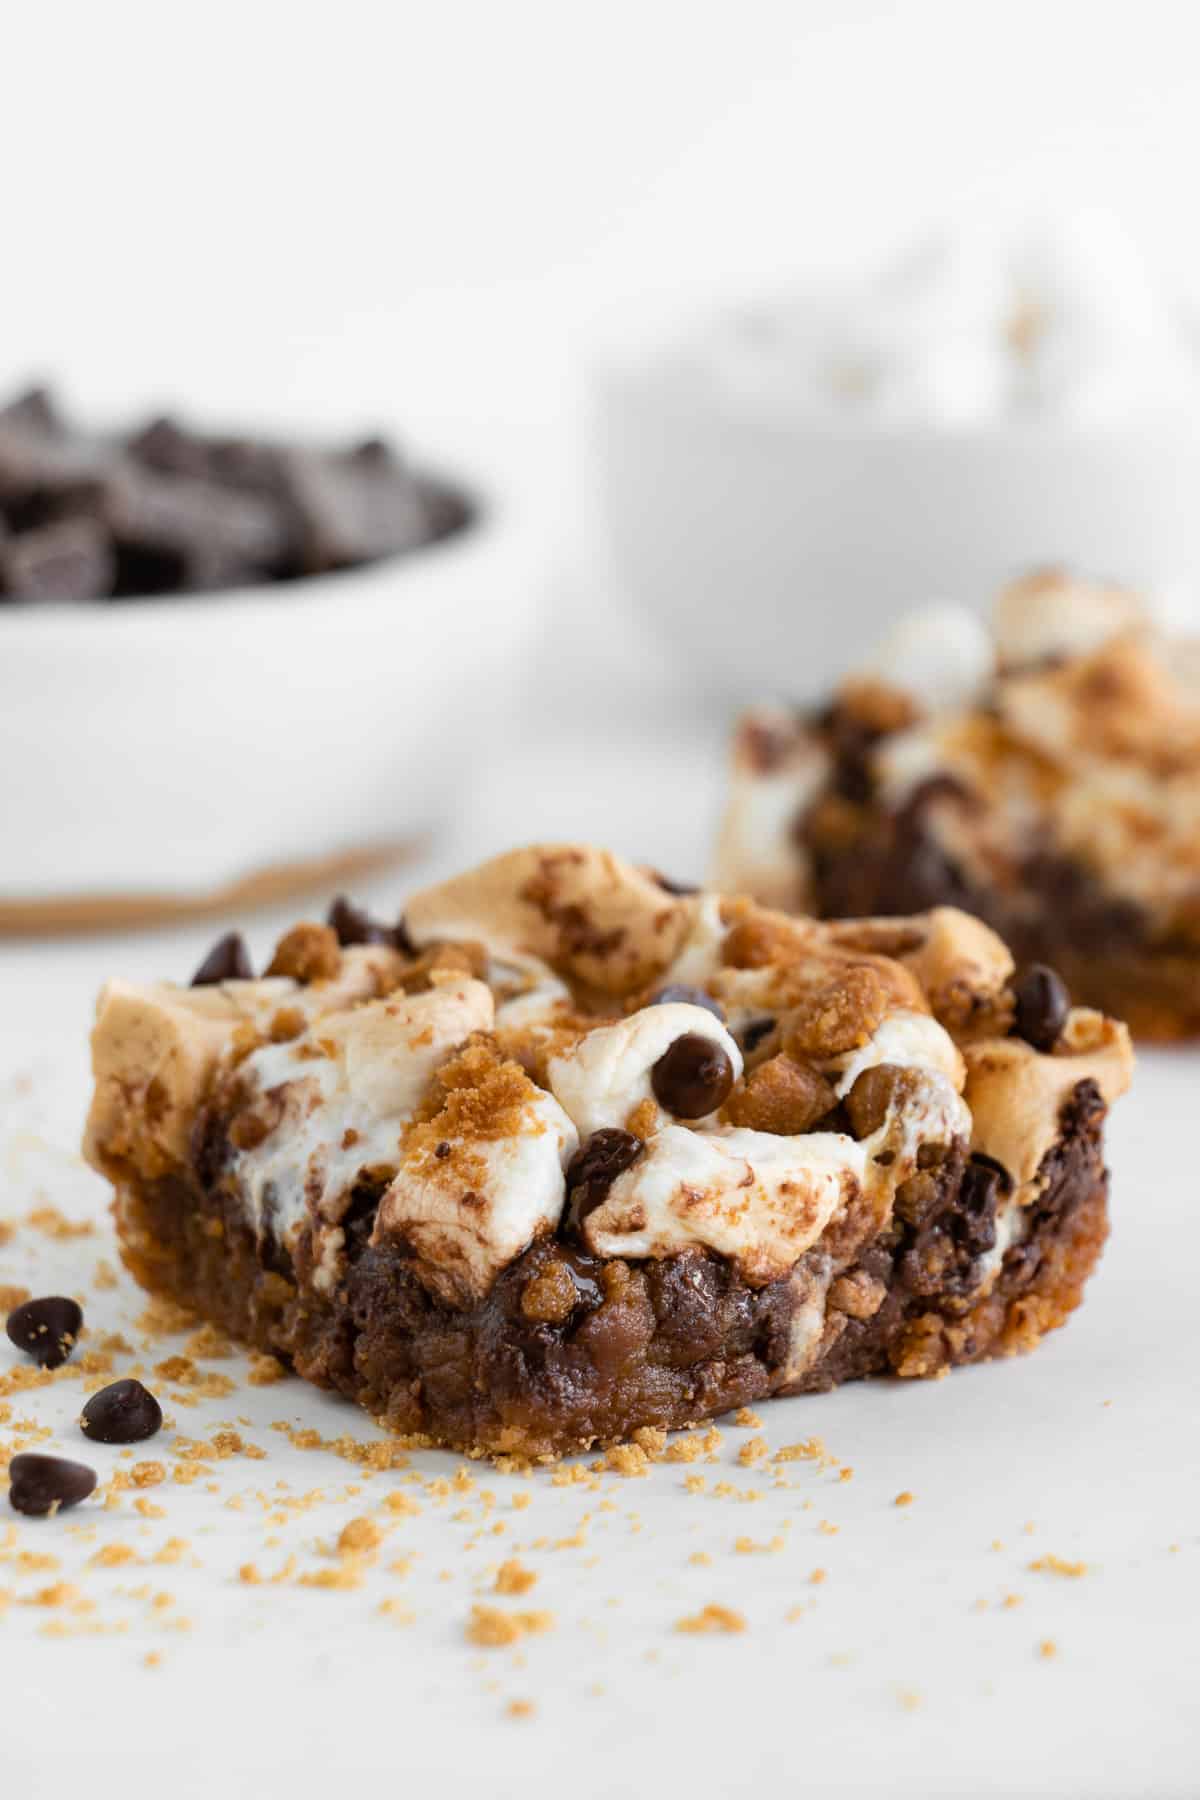 a vegan s'mores bar topped with mini marshmallows and chocolate chips